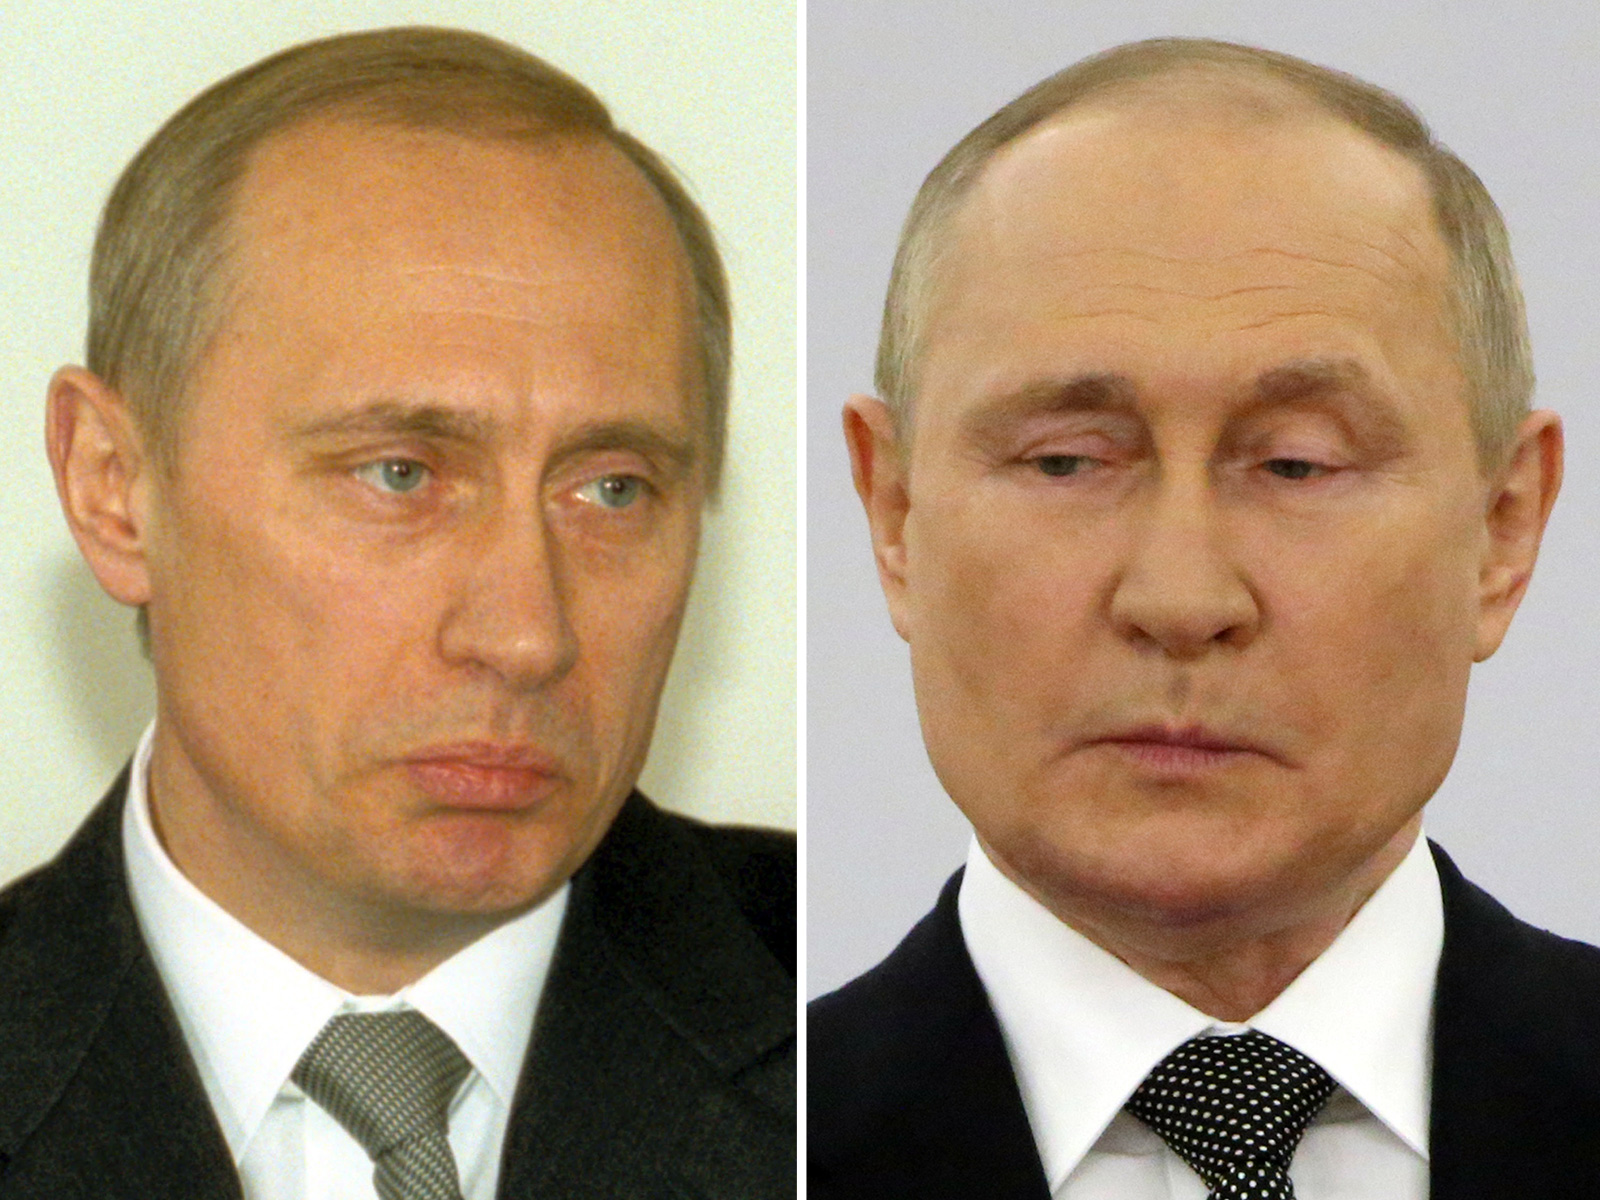 Vladimir Putin's Approval Rating Hits 20-Year Low in Global Poll - Newsweek